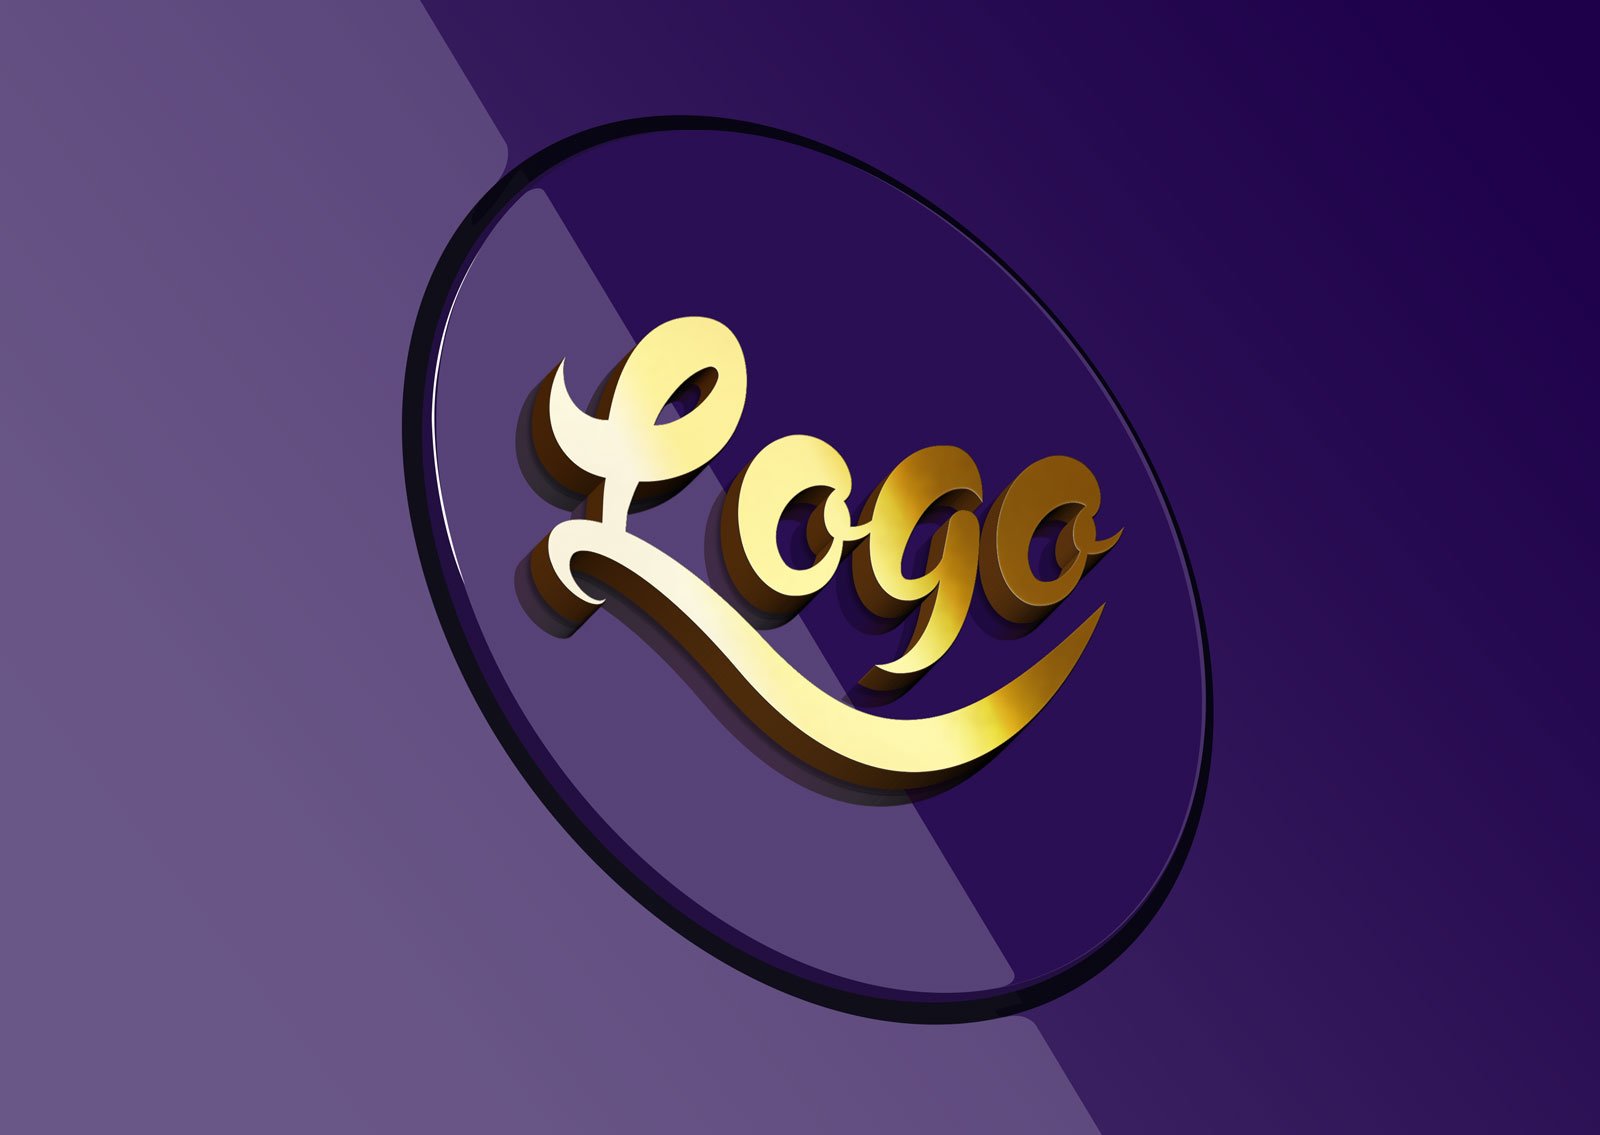 3d Logo Psd Template Free Download